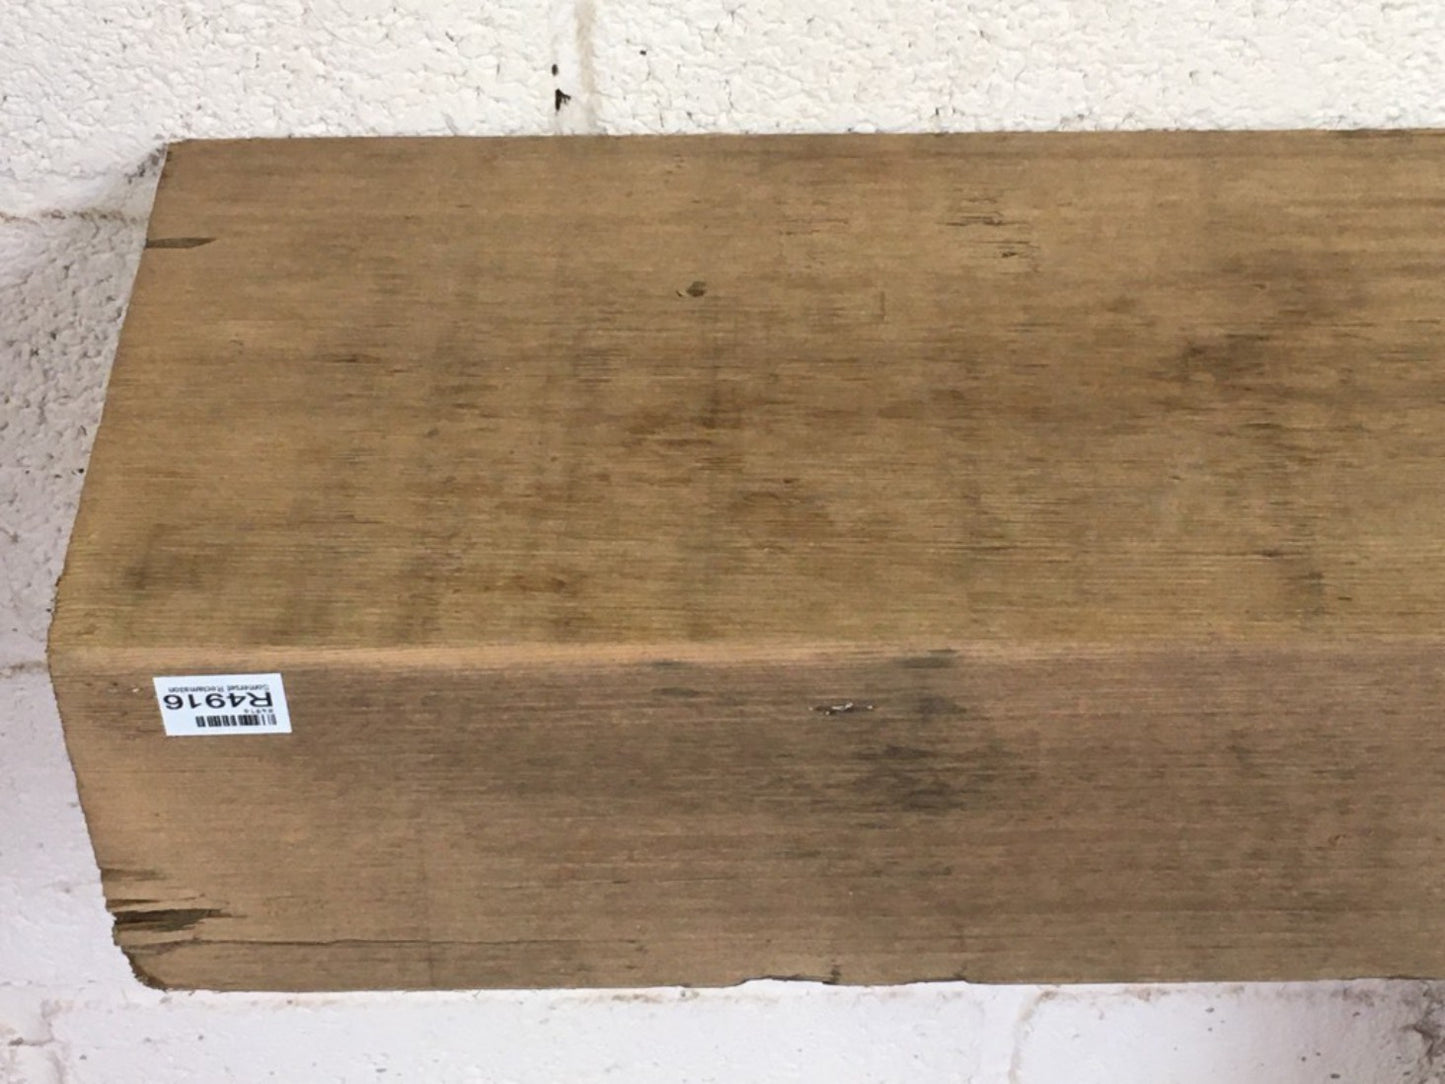 4ft 1 3/8" Or 1.26m By 9 3/4” By 6” Length Reclaimed Old Chunky Pine Beam